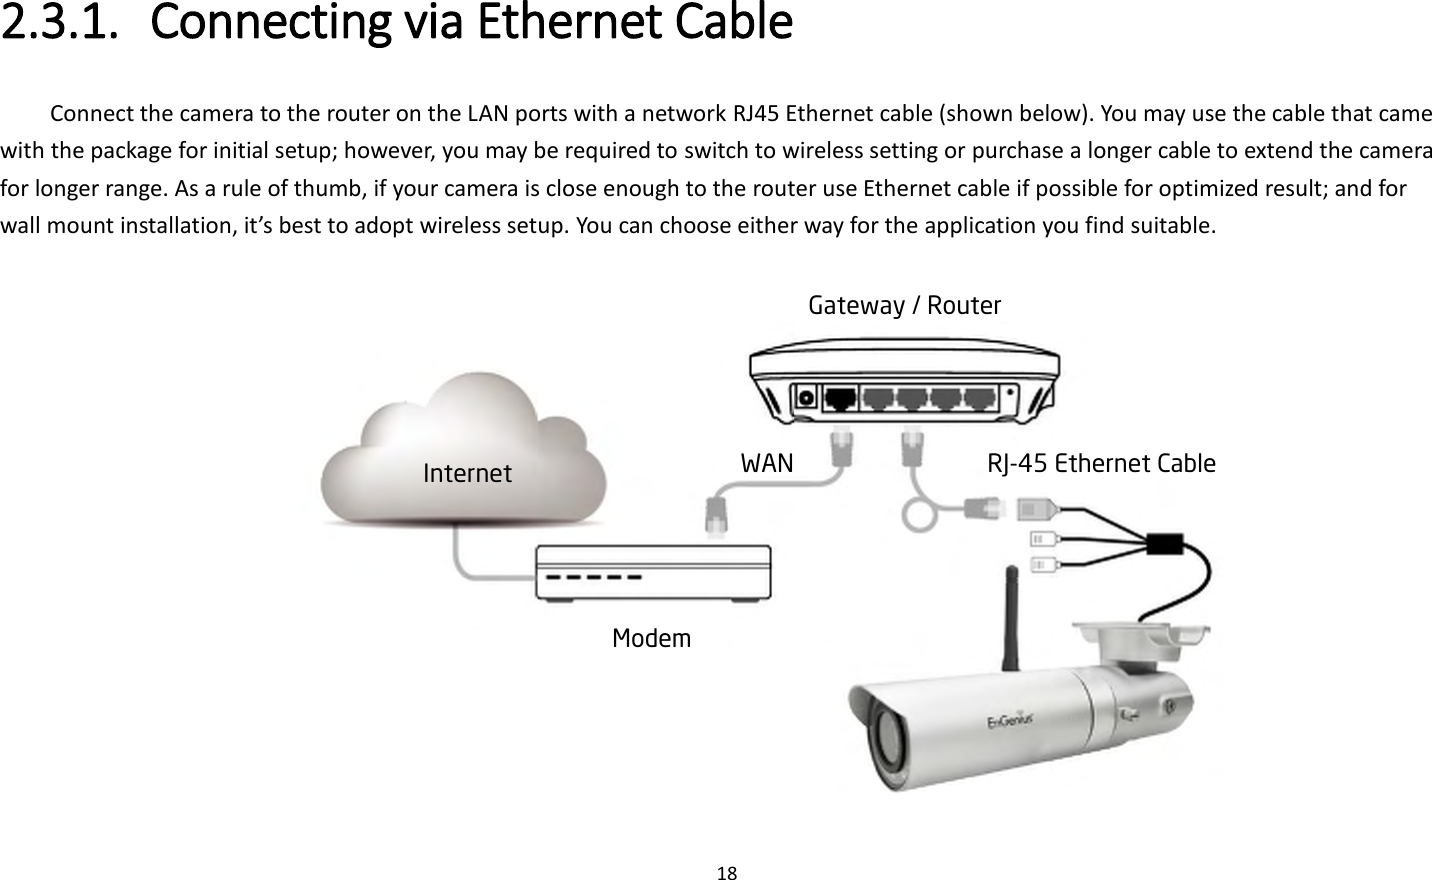 18  2.3.1. Connecting via Ethernet Cable   Connect the camera to the router on the LAN ports with a network RJ45 Ethernet cable (shown below). You may use the cable that came with the package for initial setup; however, you may be required to switch to wireless setting or purchase a longer cable to extend the camera for longer range. As a rule of thumb, if your camera is close enough to the router use Ethernet cable if possible for optimized result; and for wall mount installation, it’s best to adopt wireless setup. You can choose either way for the application you find suitable.      Internet Gateway / Router  Modem WAN RJ-45 Ethernet Cable 